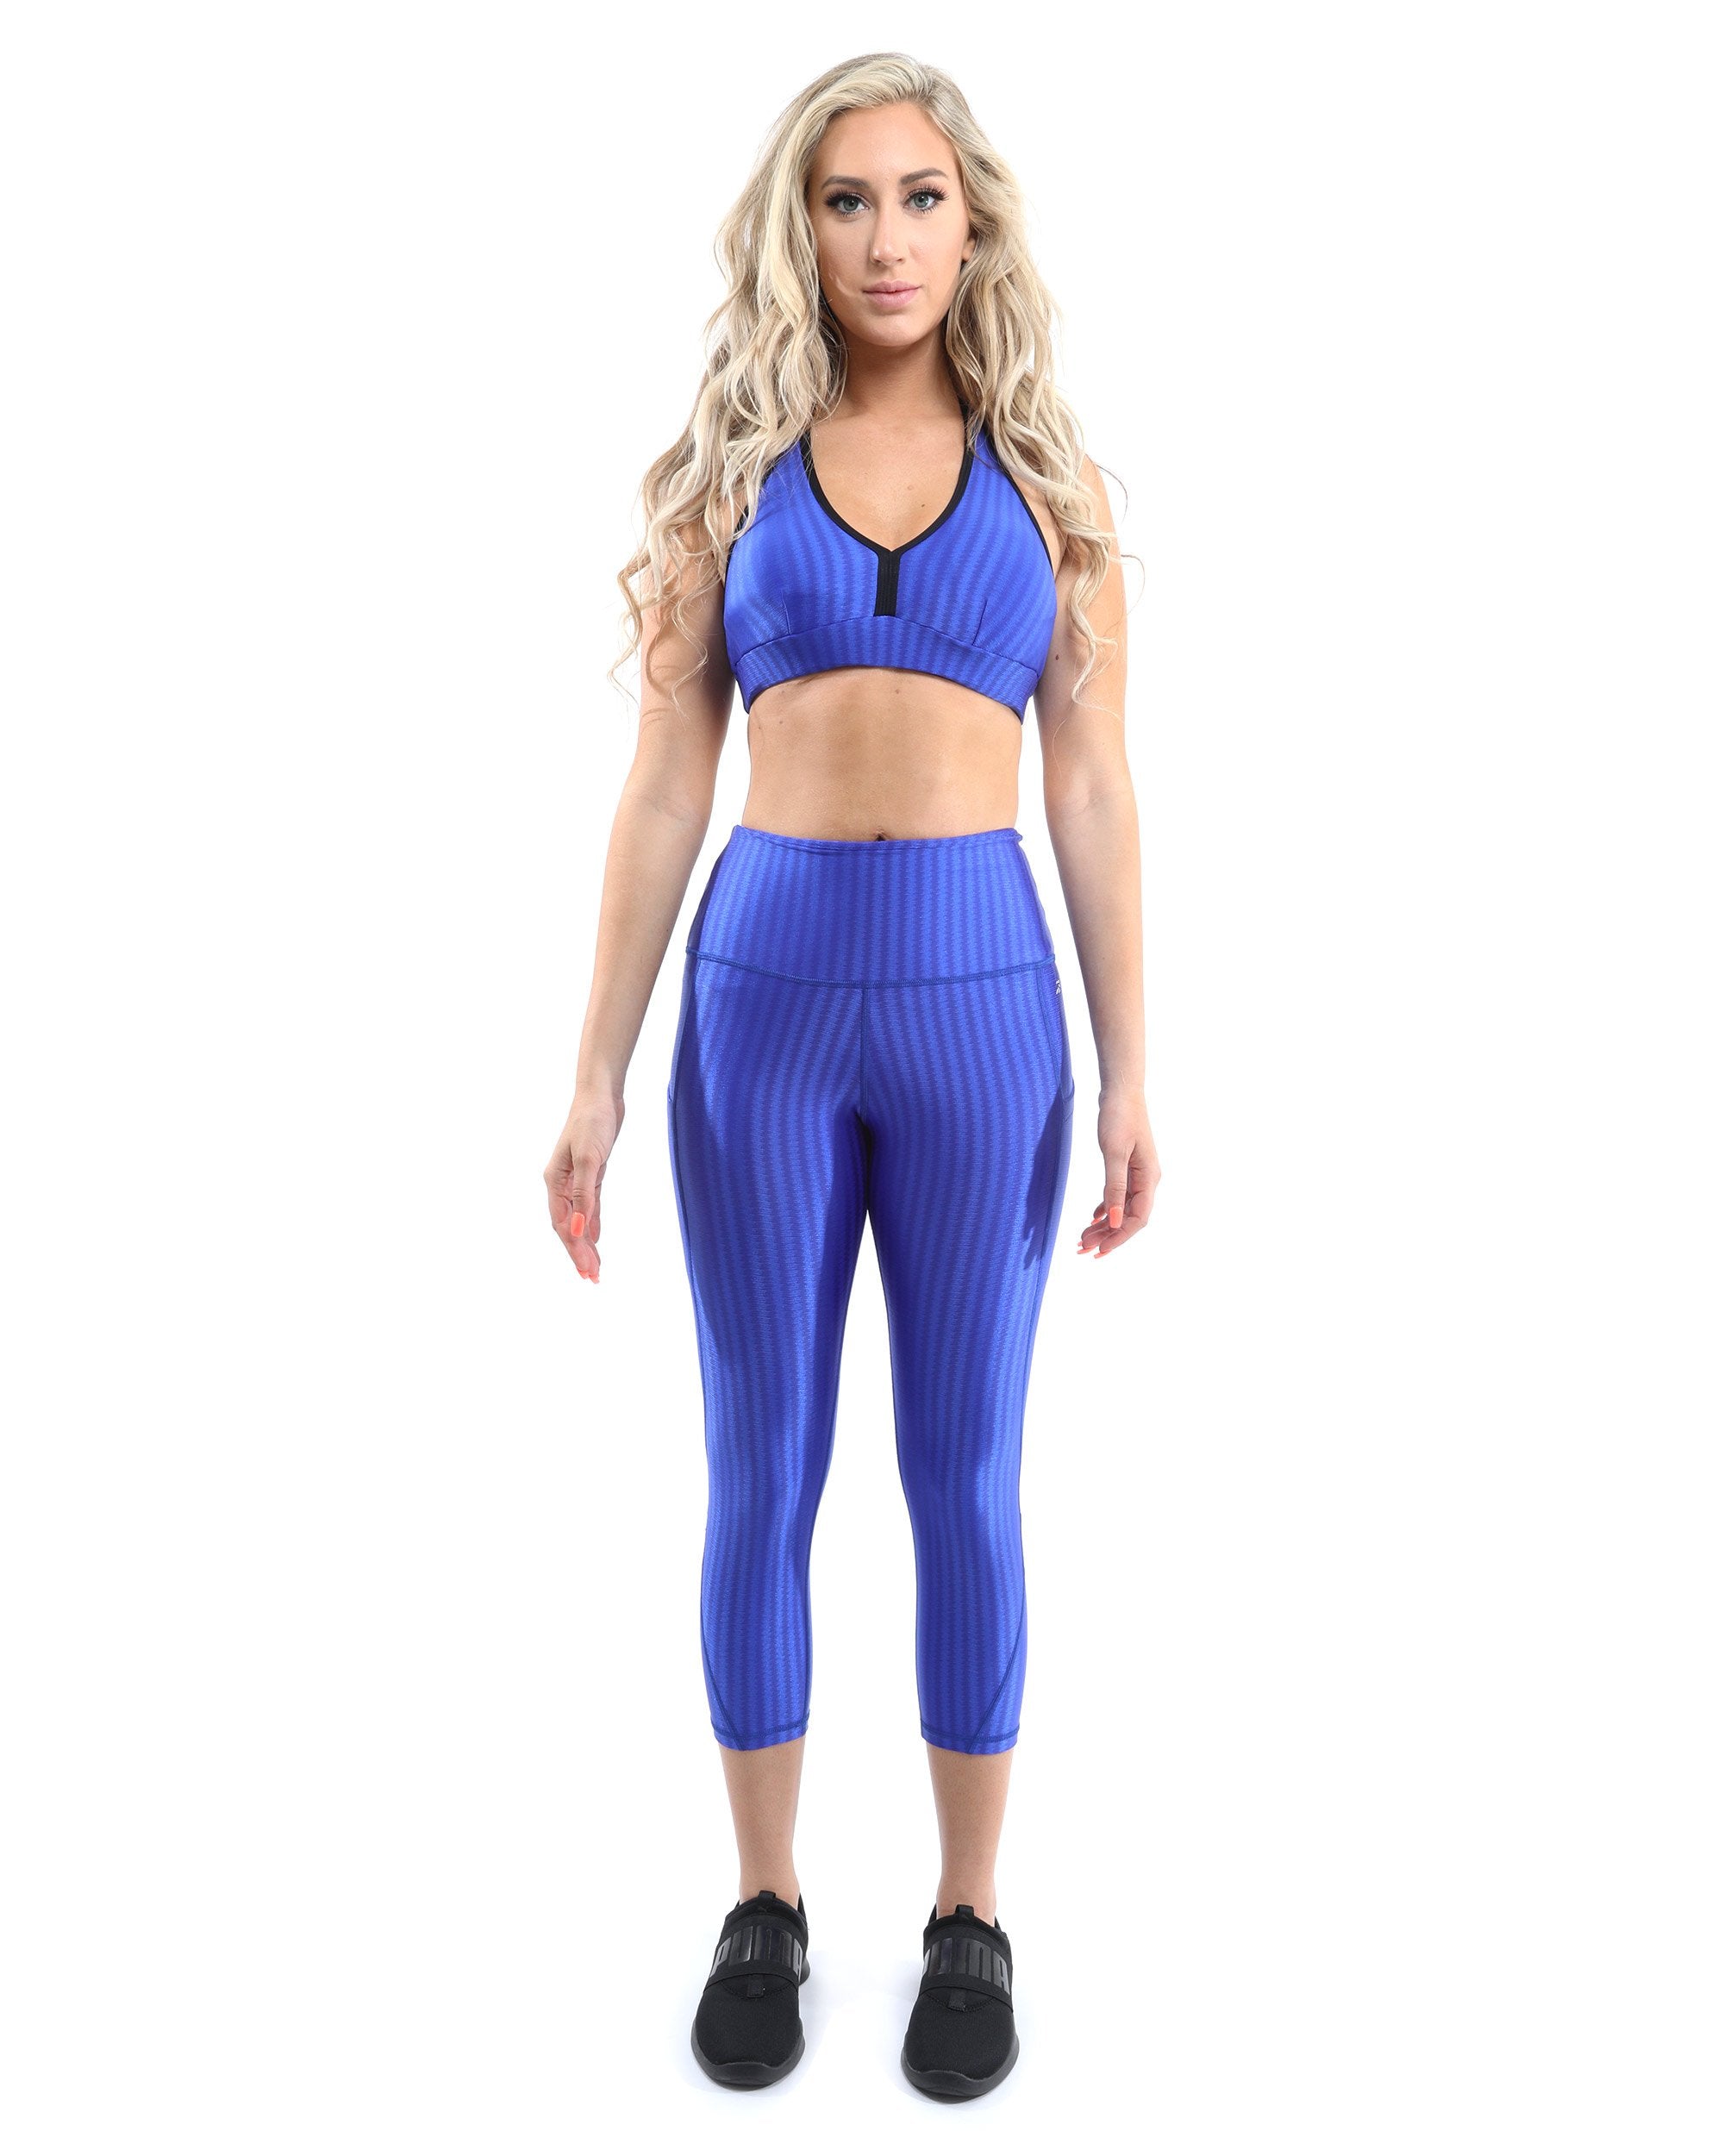 SALE! 50% OFF! Firenze Activewear Sports Bra - Blue [MADE IN ITALY] - Size Small